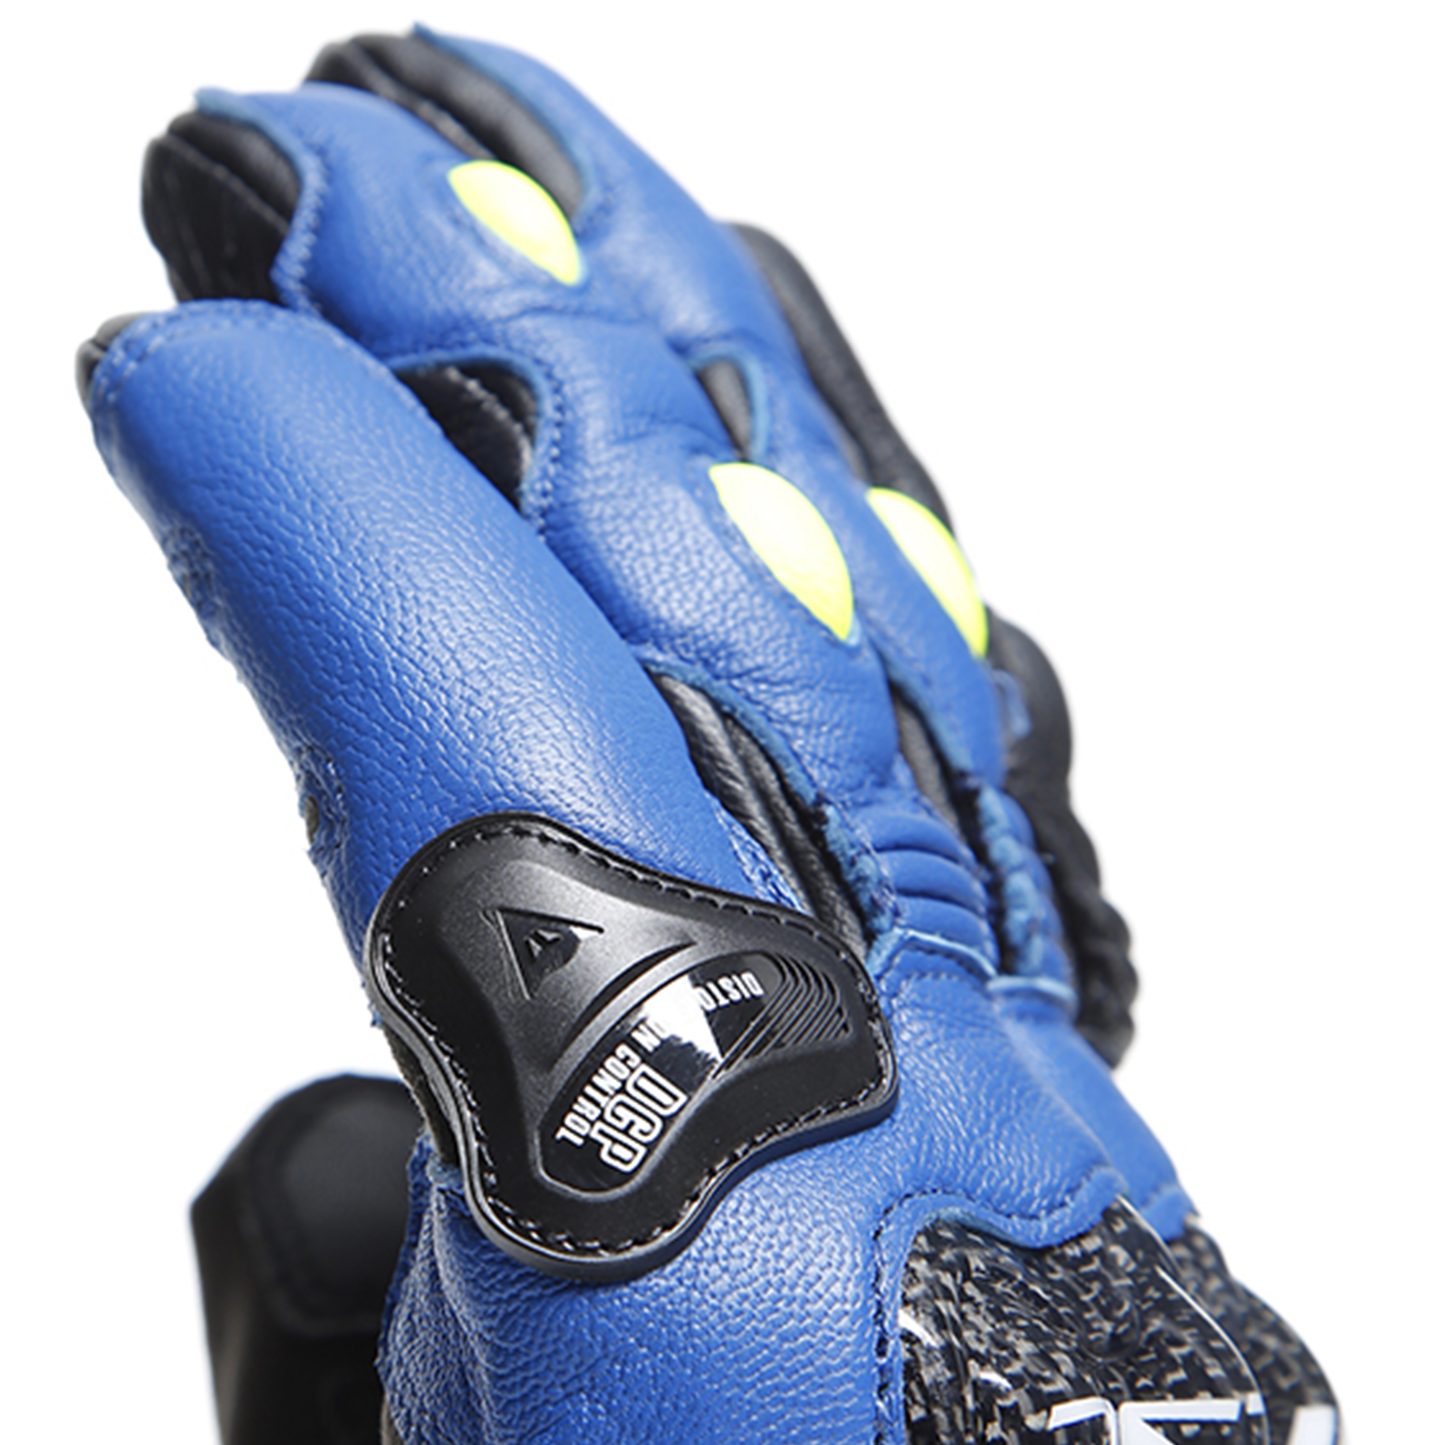 Dainese Carbon 4 Short Leather Gloves - Racing Blue/Black/Flo Yellow